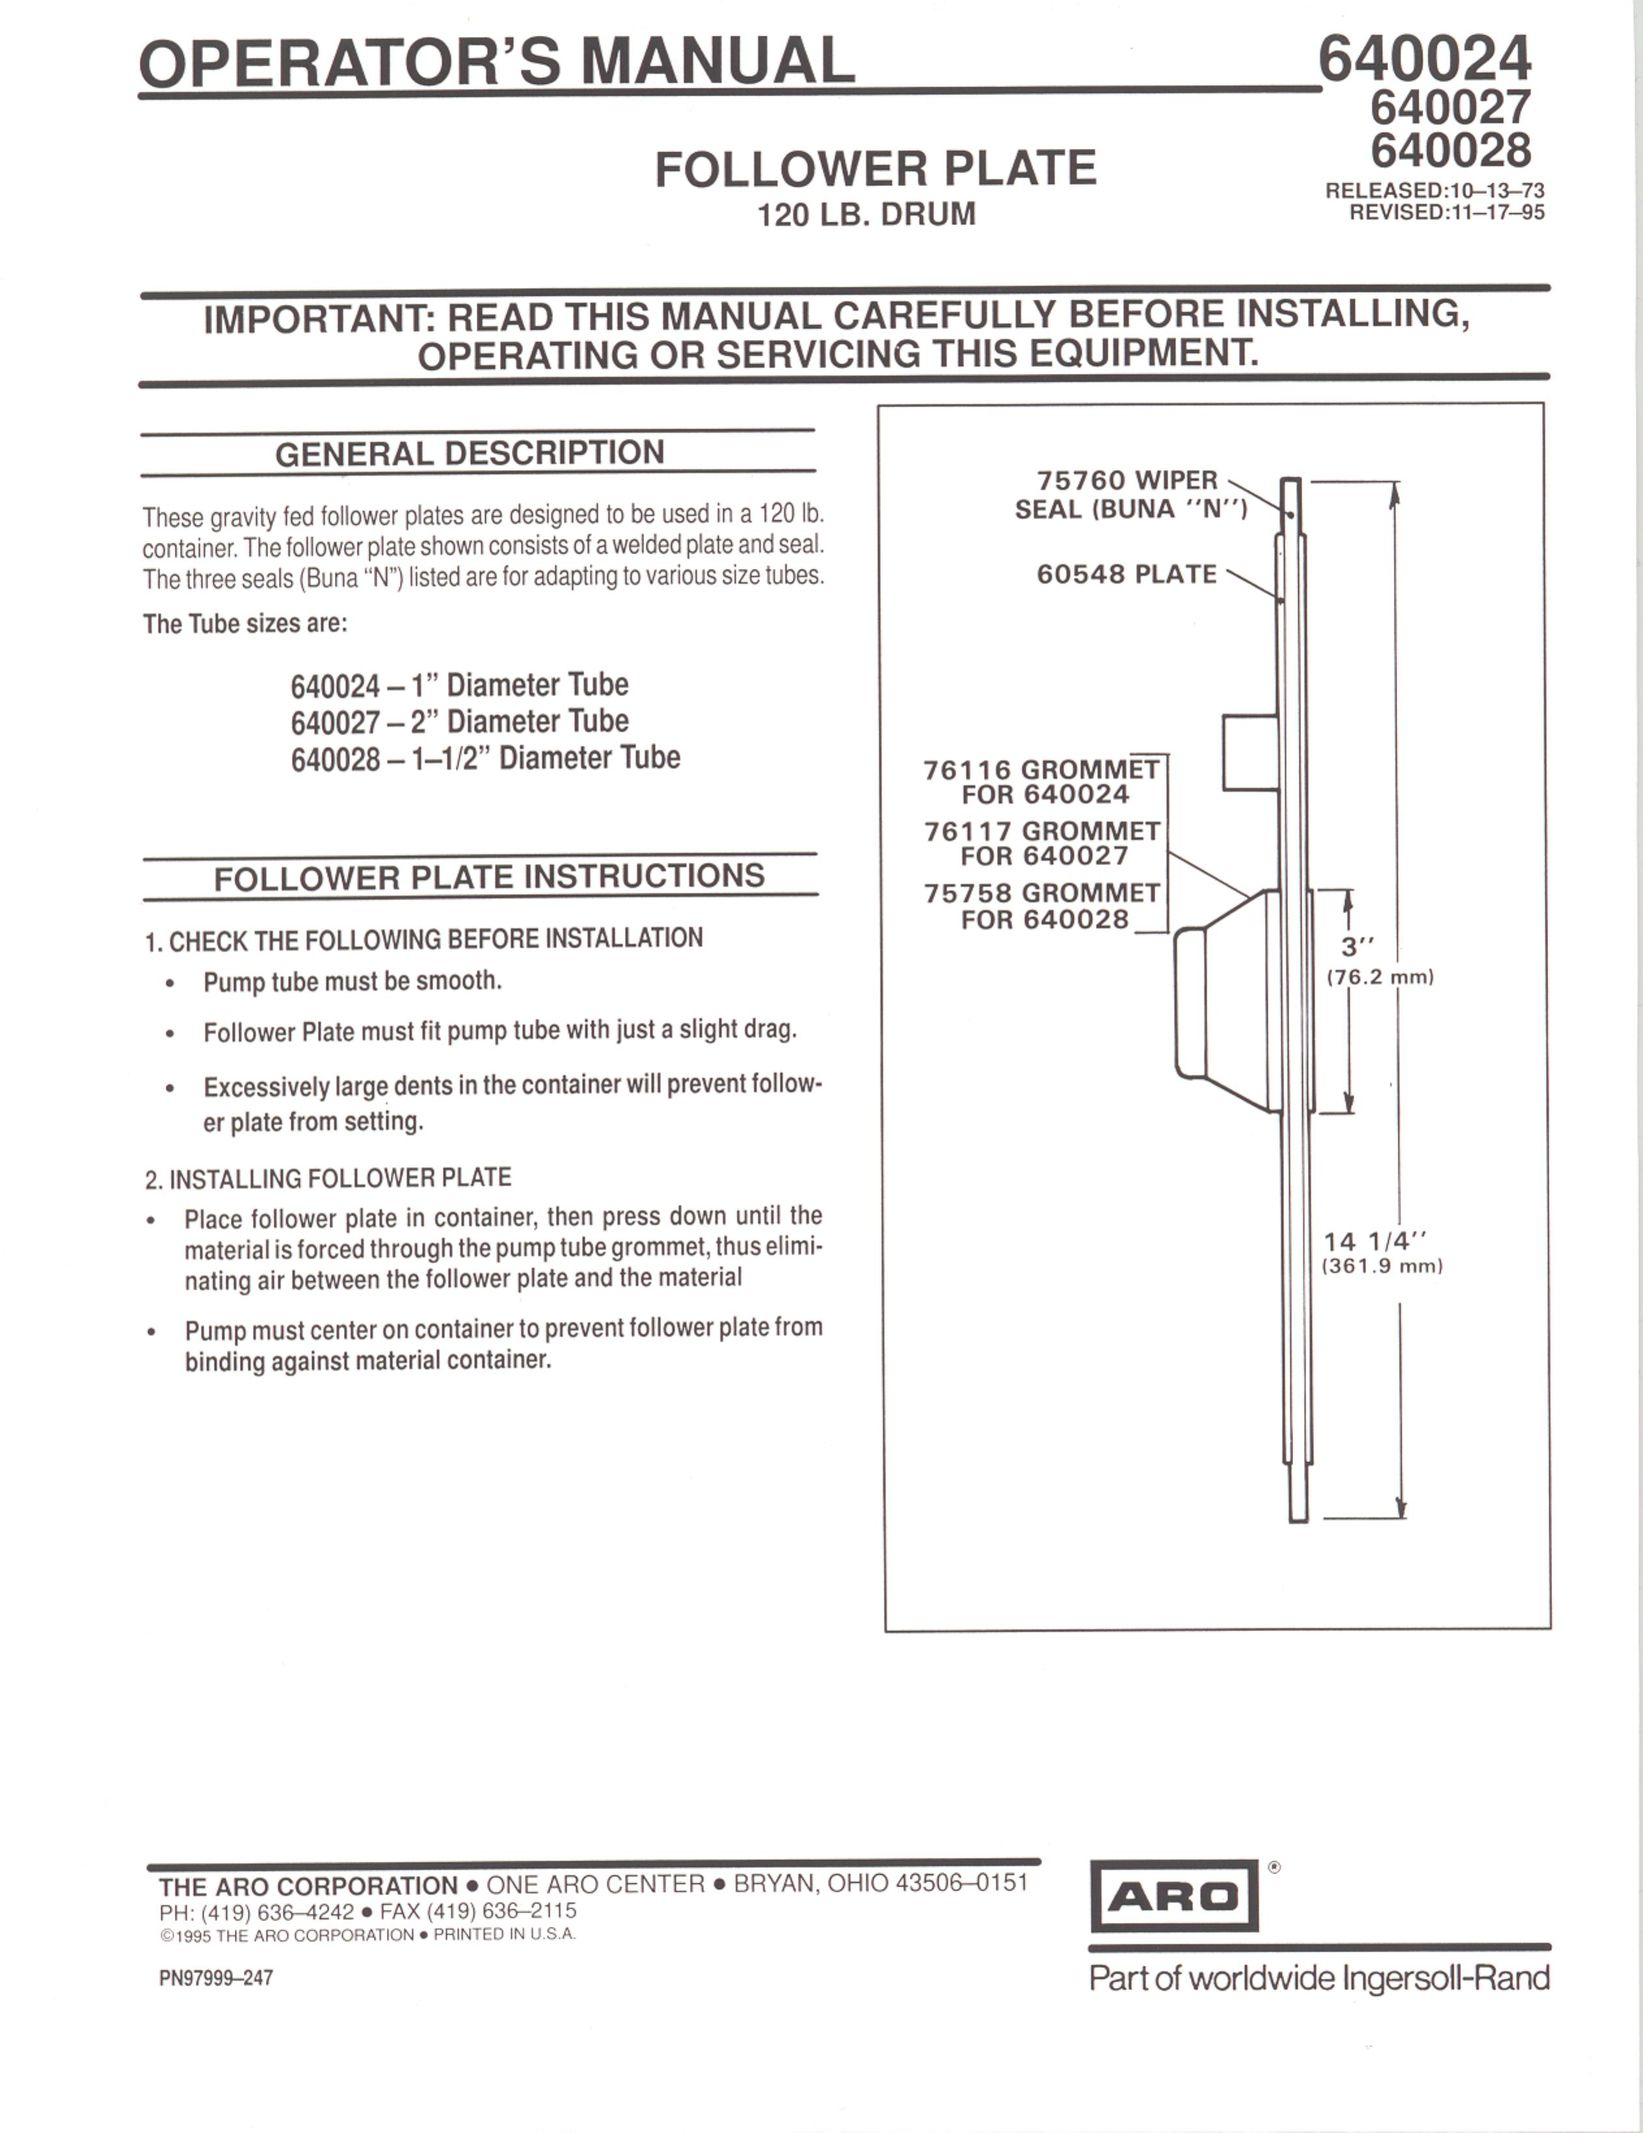 Ingersoll-Rand 640027 Biscuit Joiner User Manual